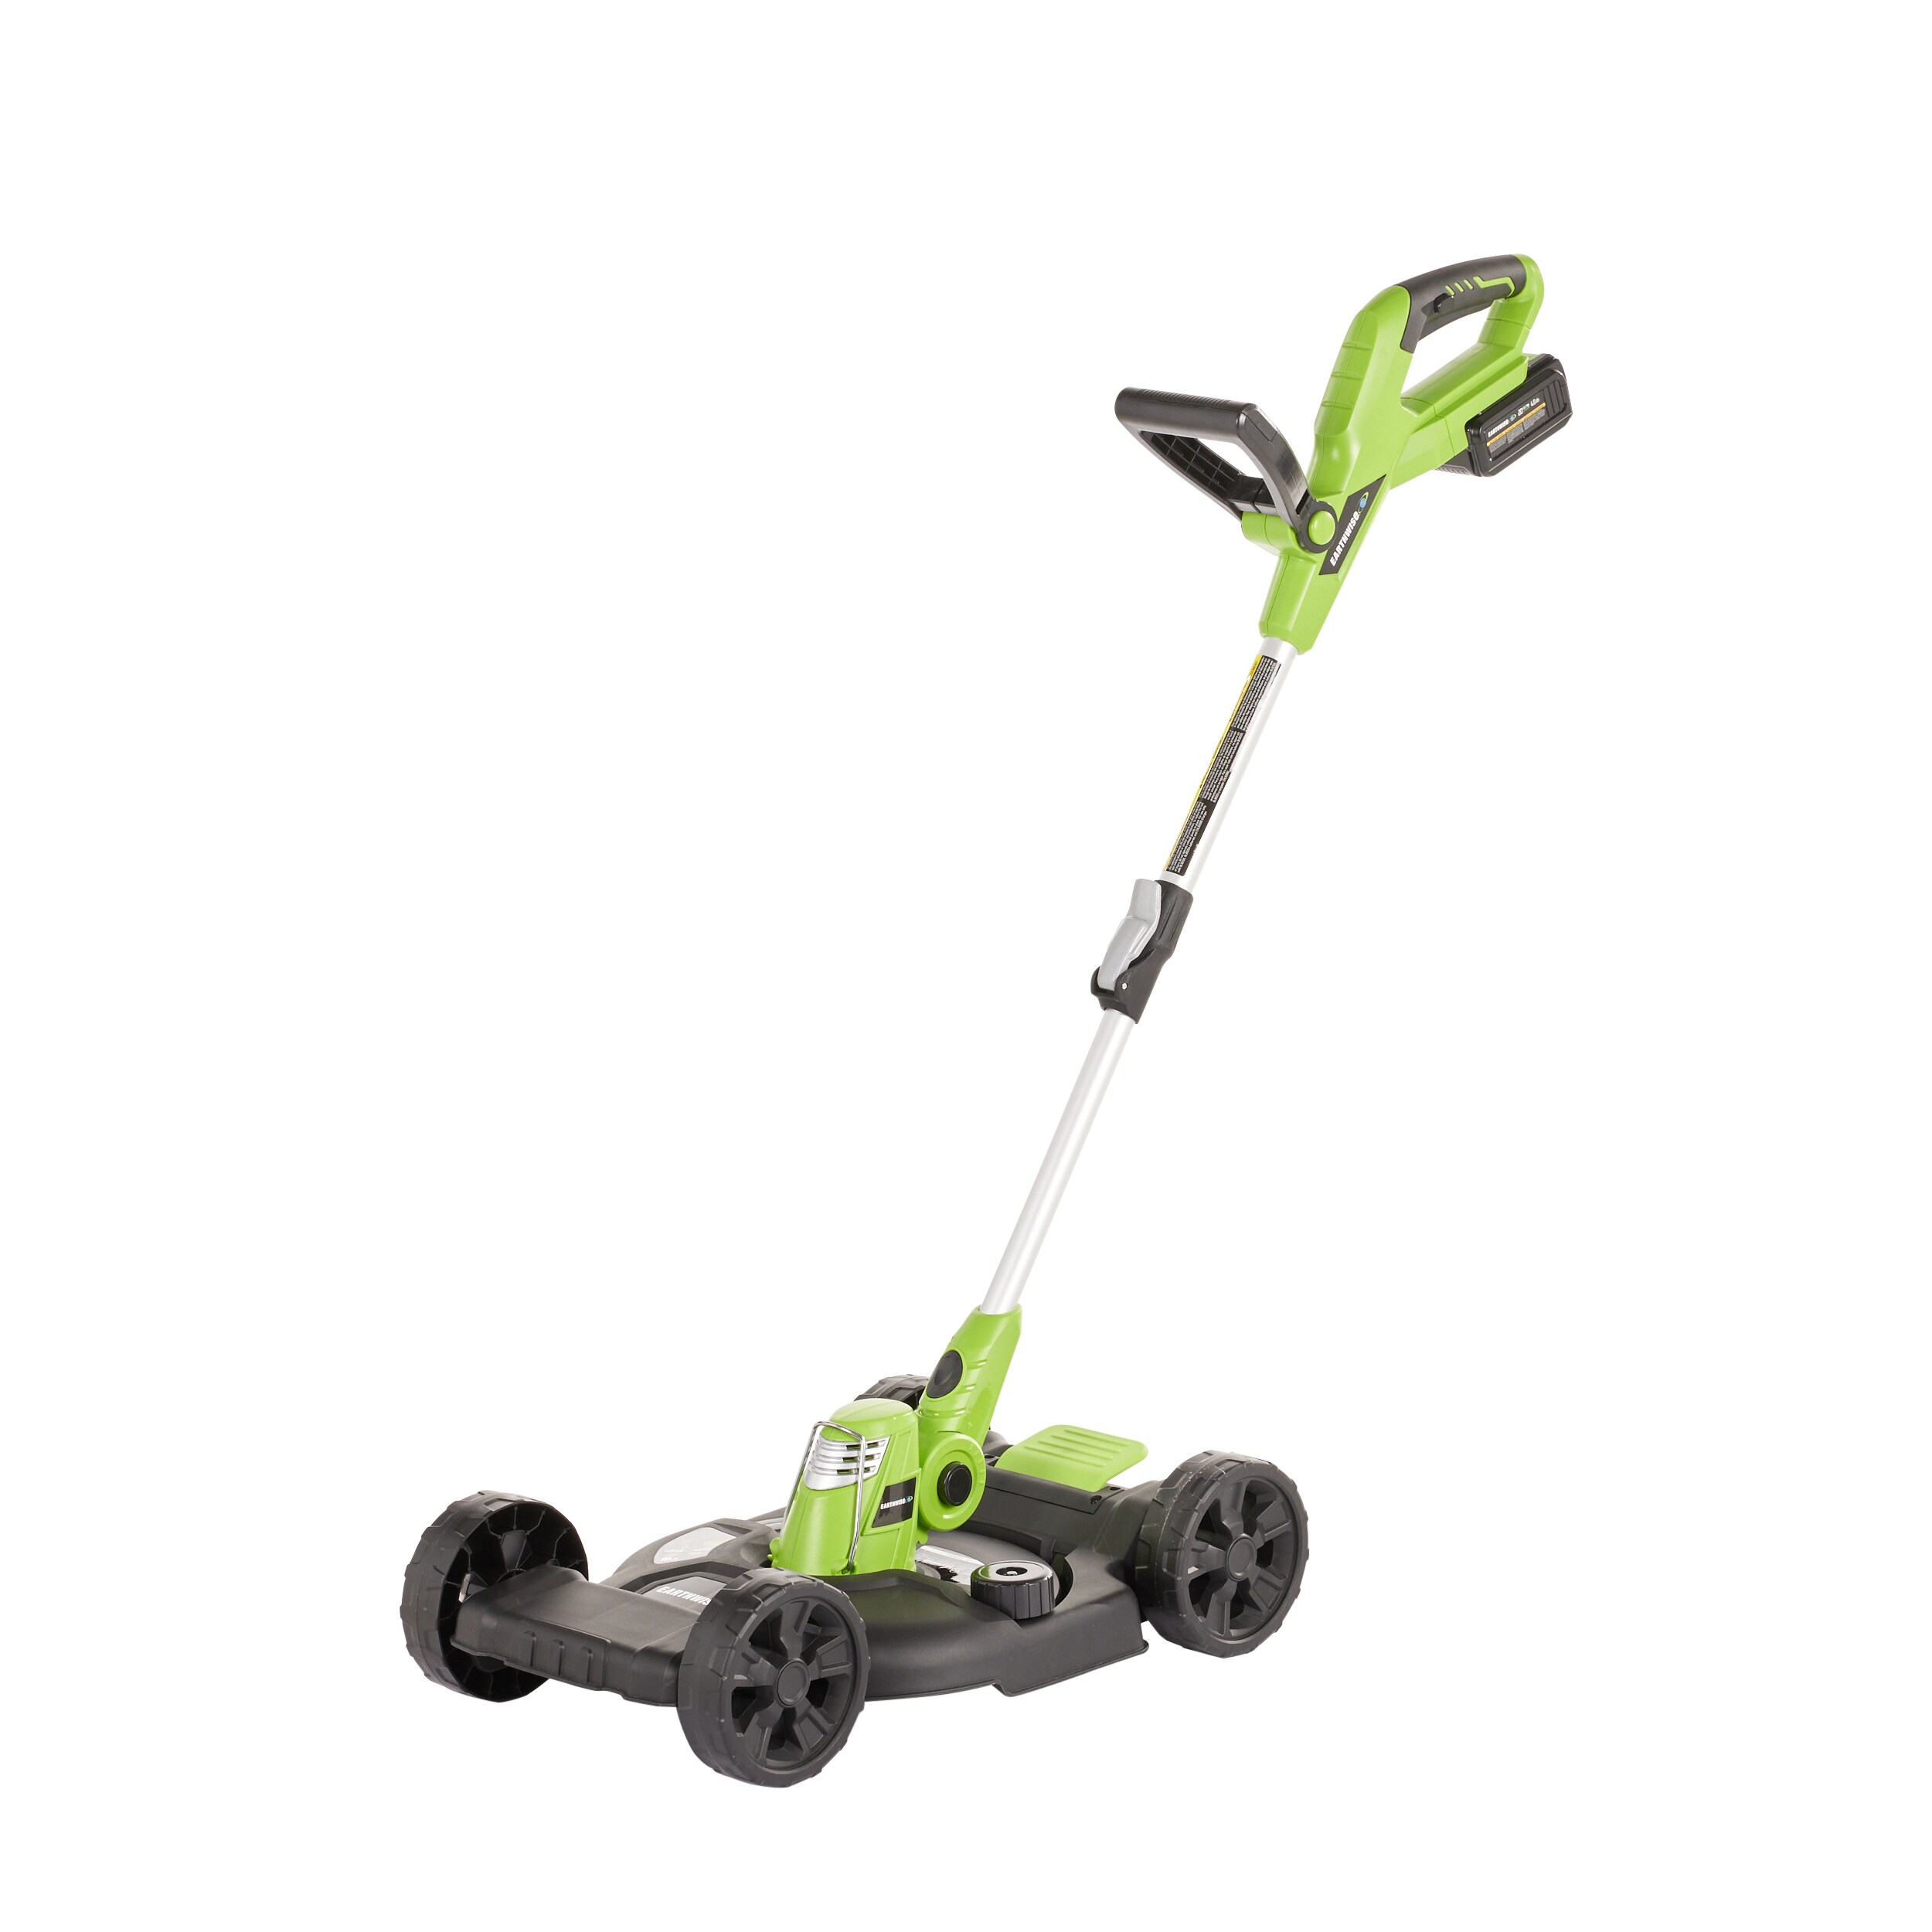 Earthwise 12 Corded Electric 2-in-1 String Trimmer / Mower